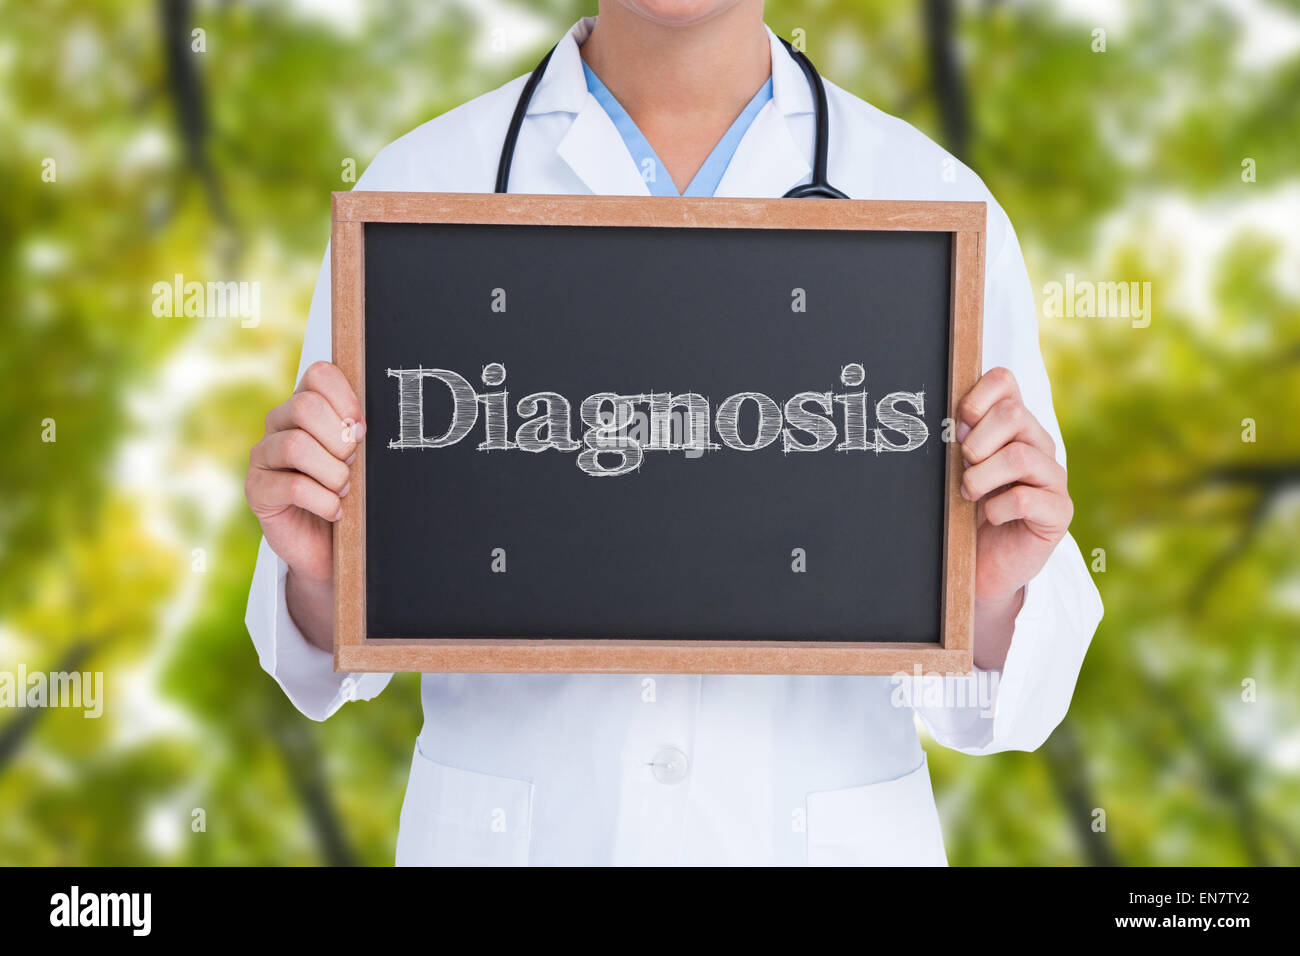 Diagnosis against low angle view of tall trees Stock Photo